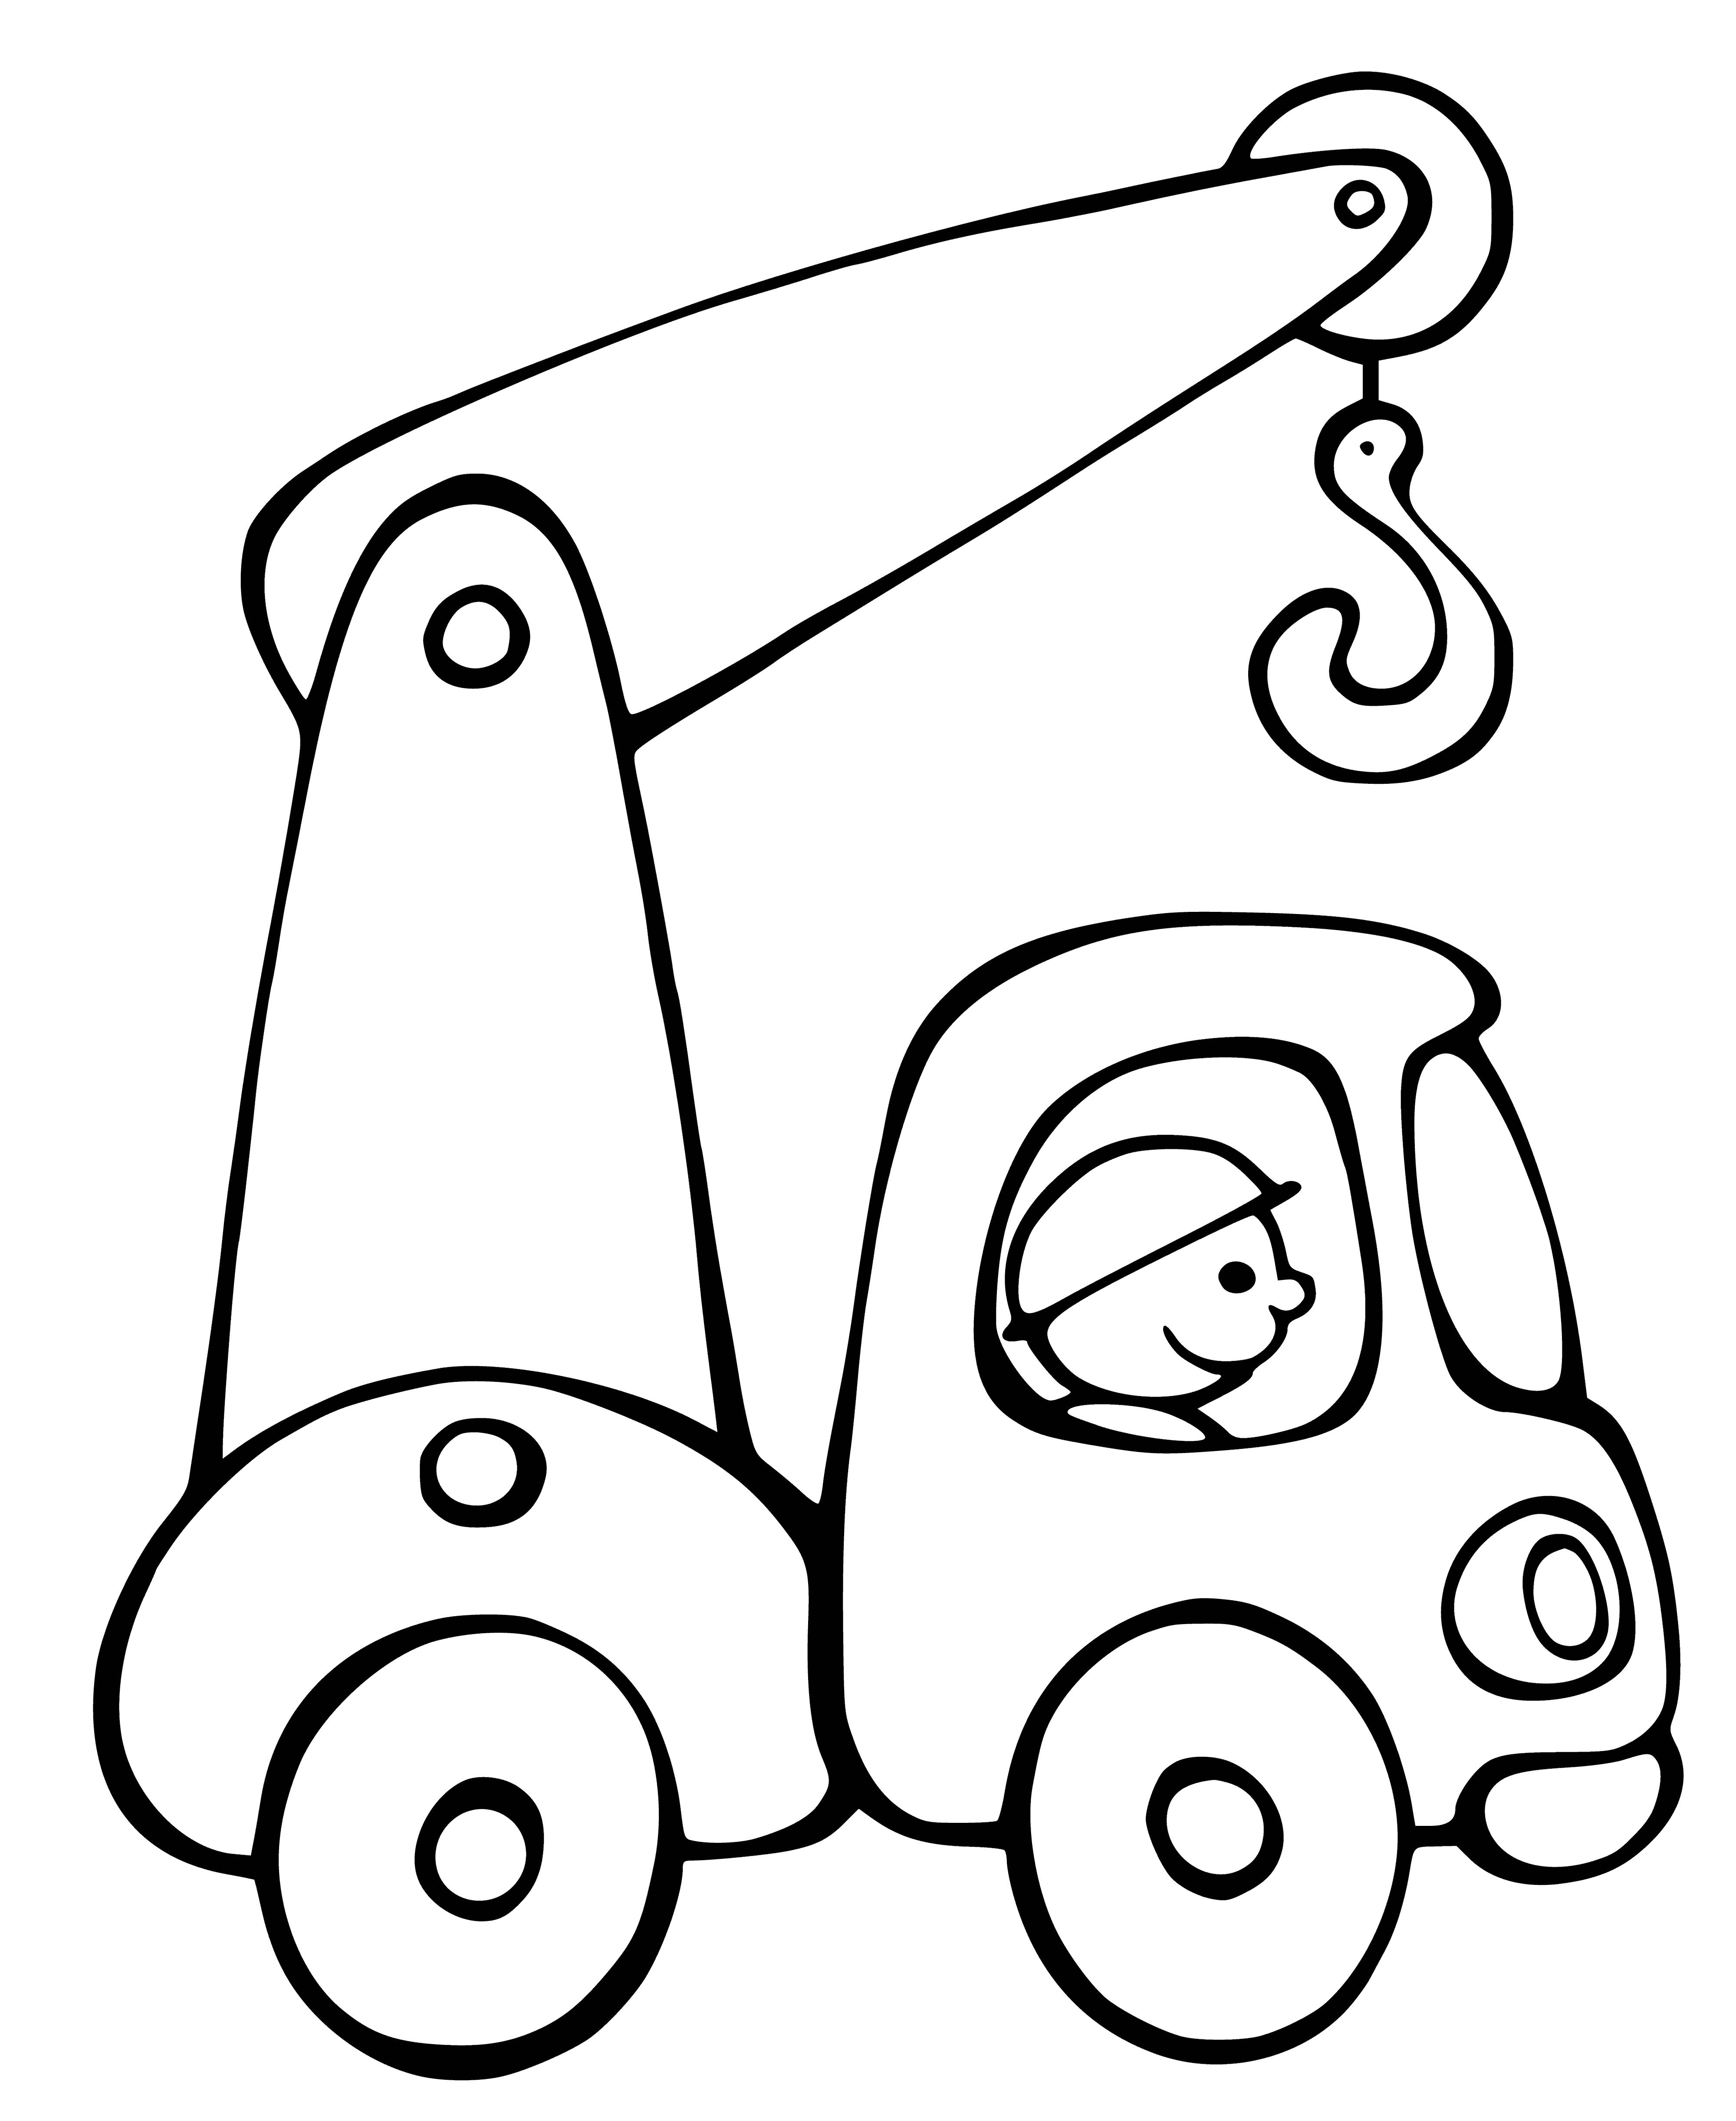 Tap coloring page